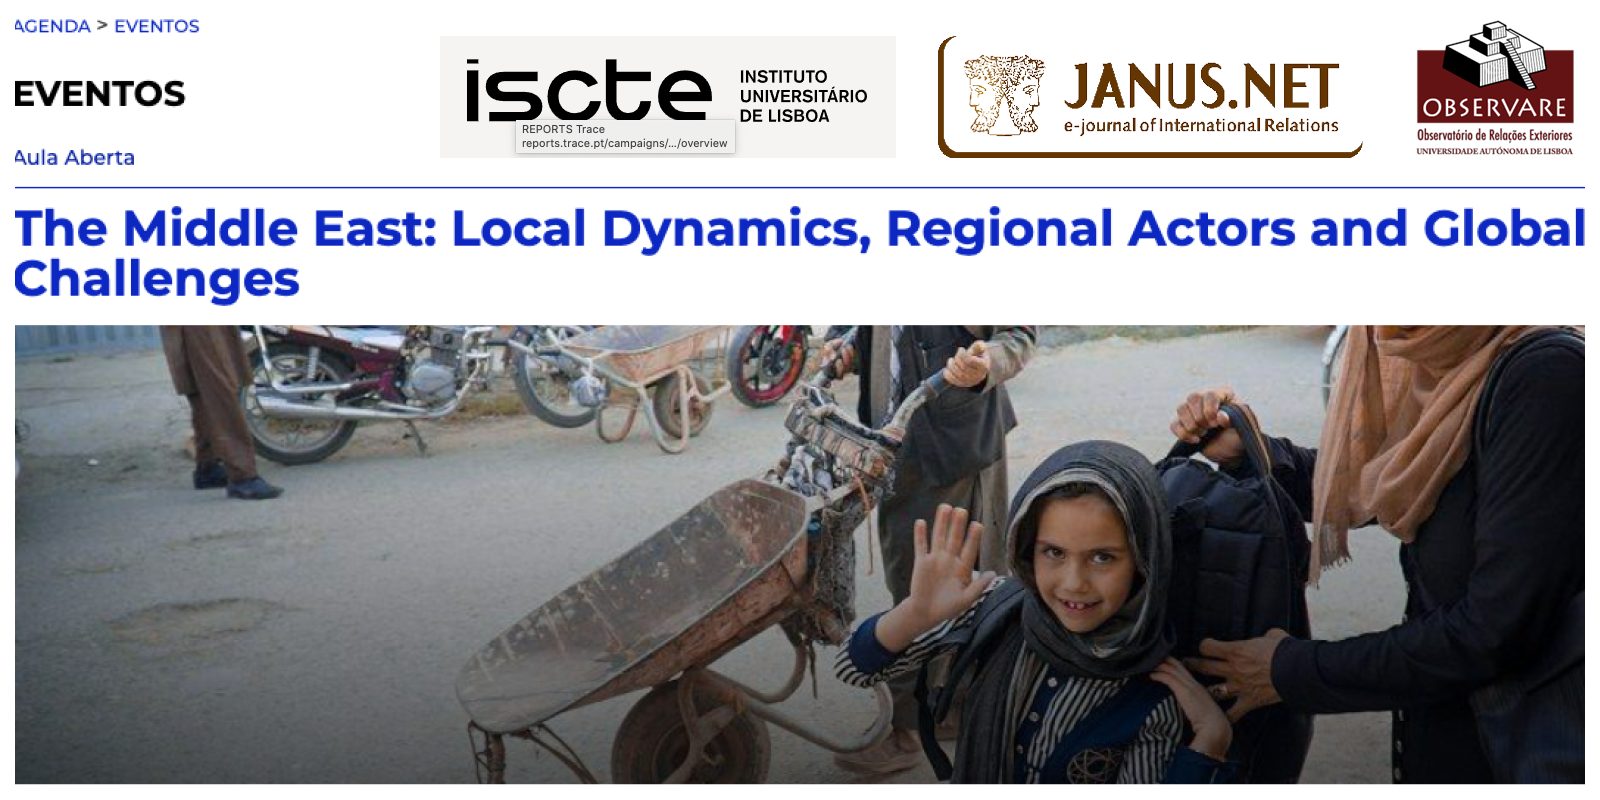 Aula aberta | The Middle East: Local Dynamics, Regional Actors and Global Challenges |